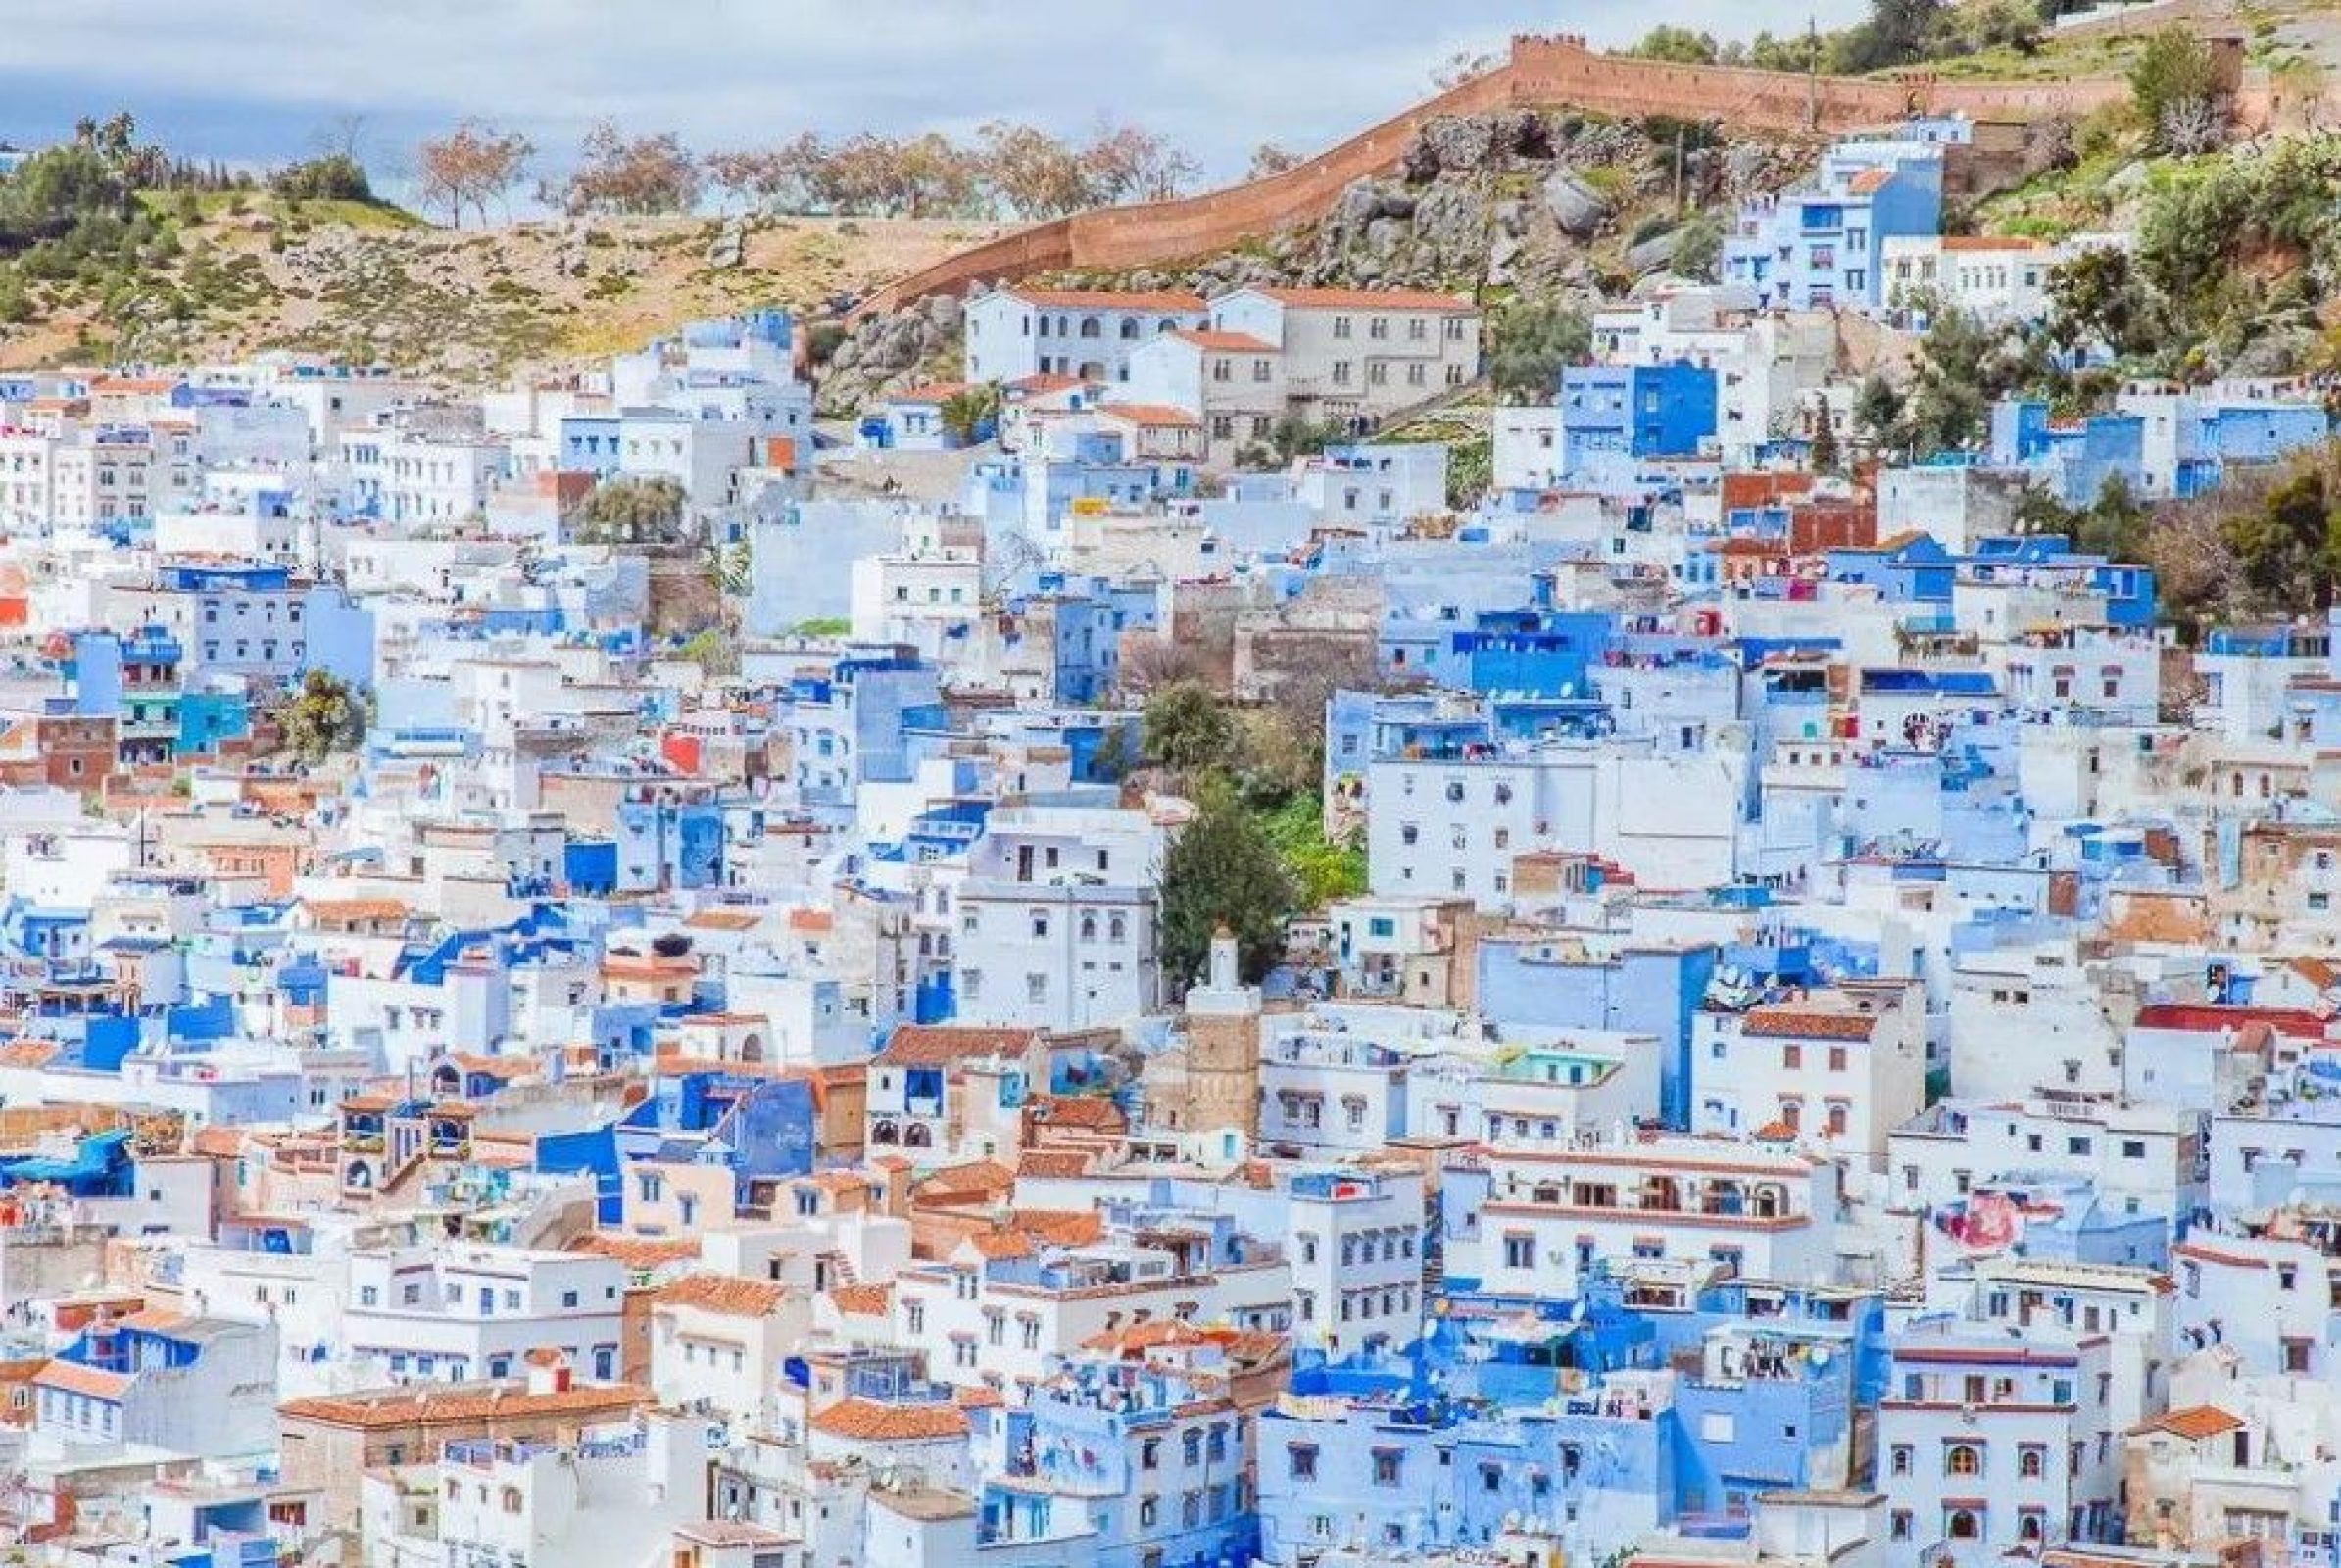 Why The City Of Chefchaouen In Morocco Is Entirely Blue Arch2o Com